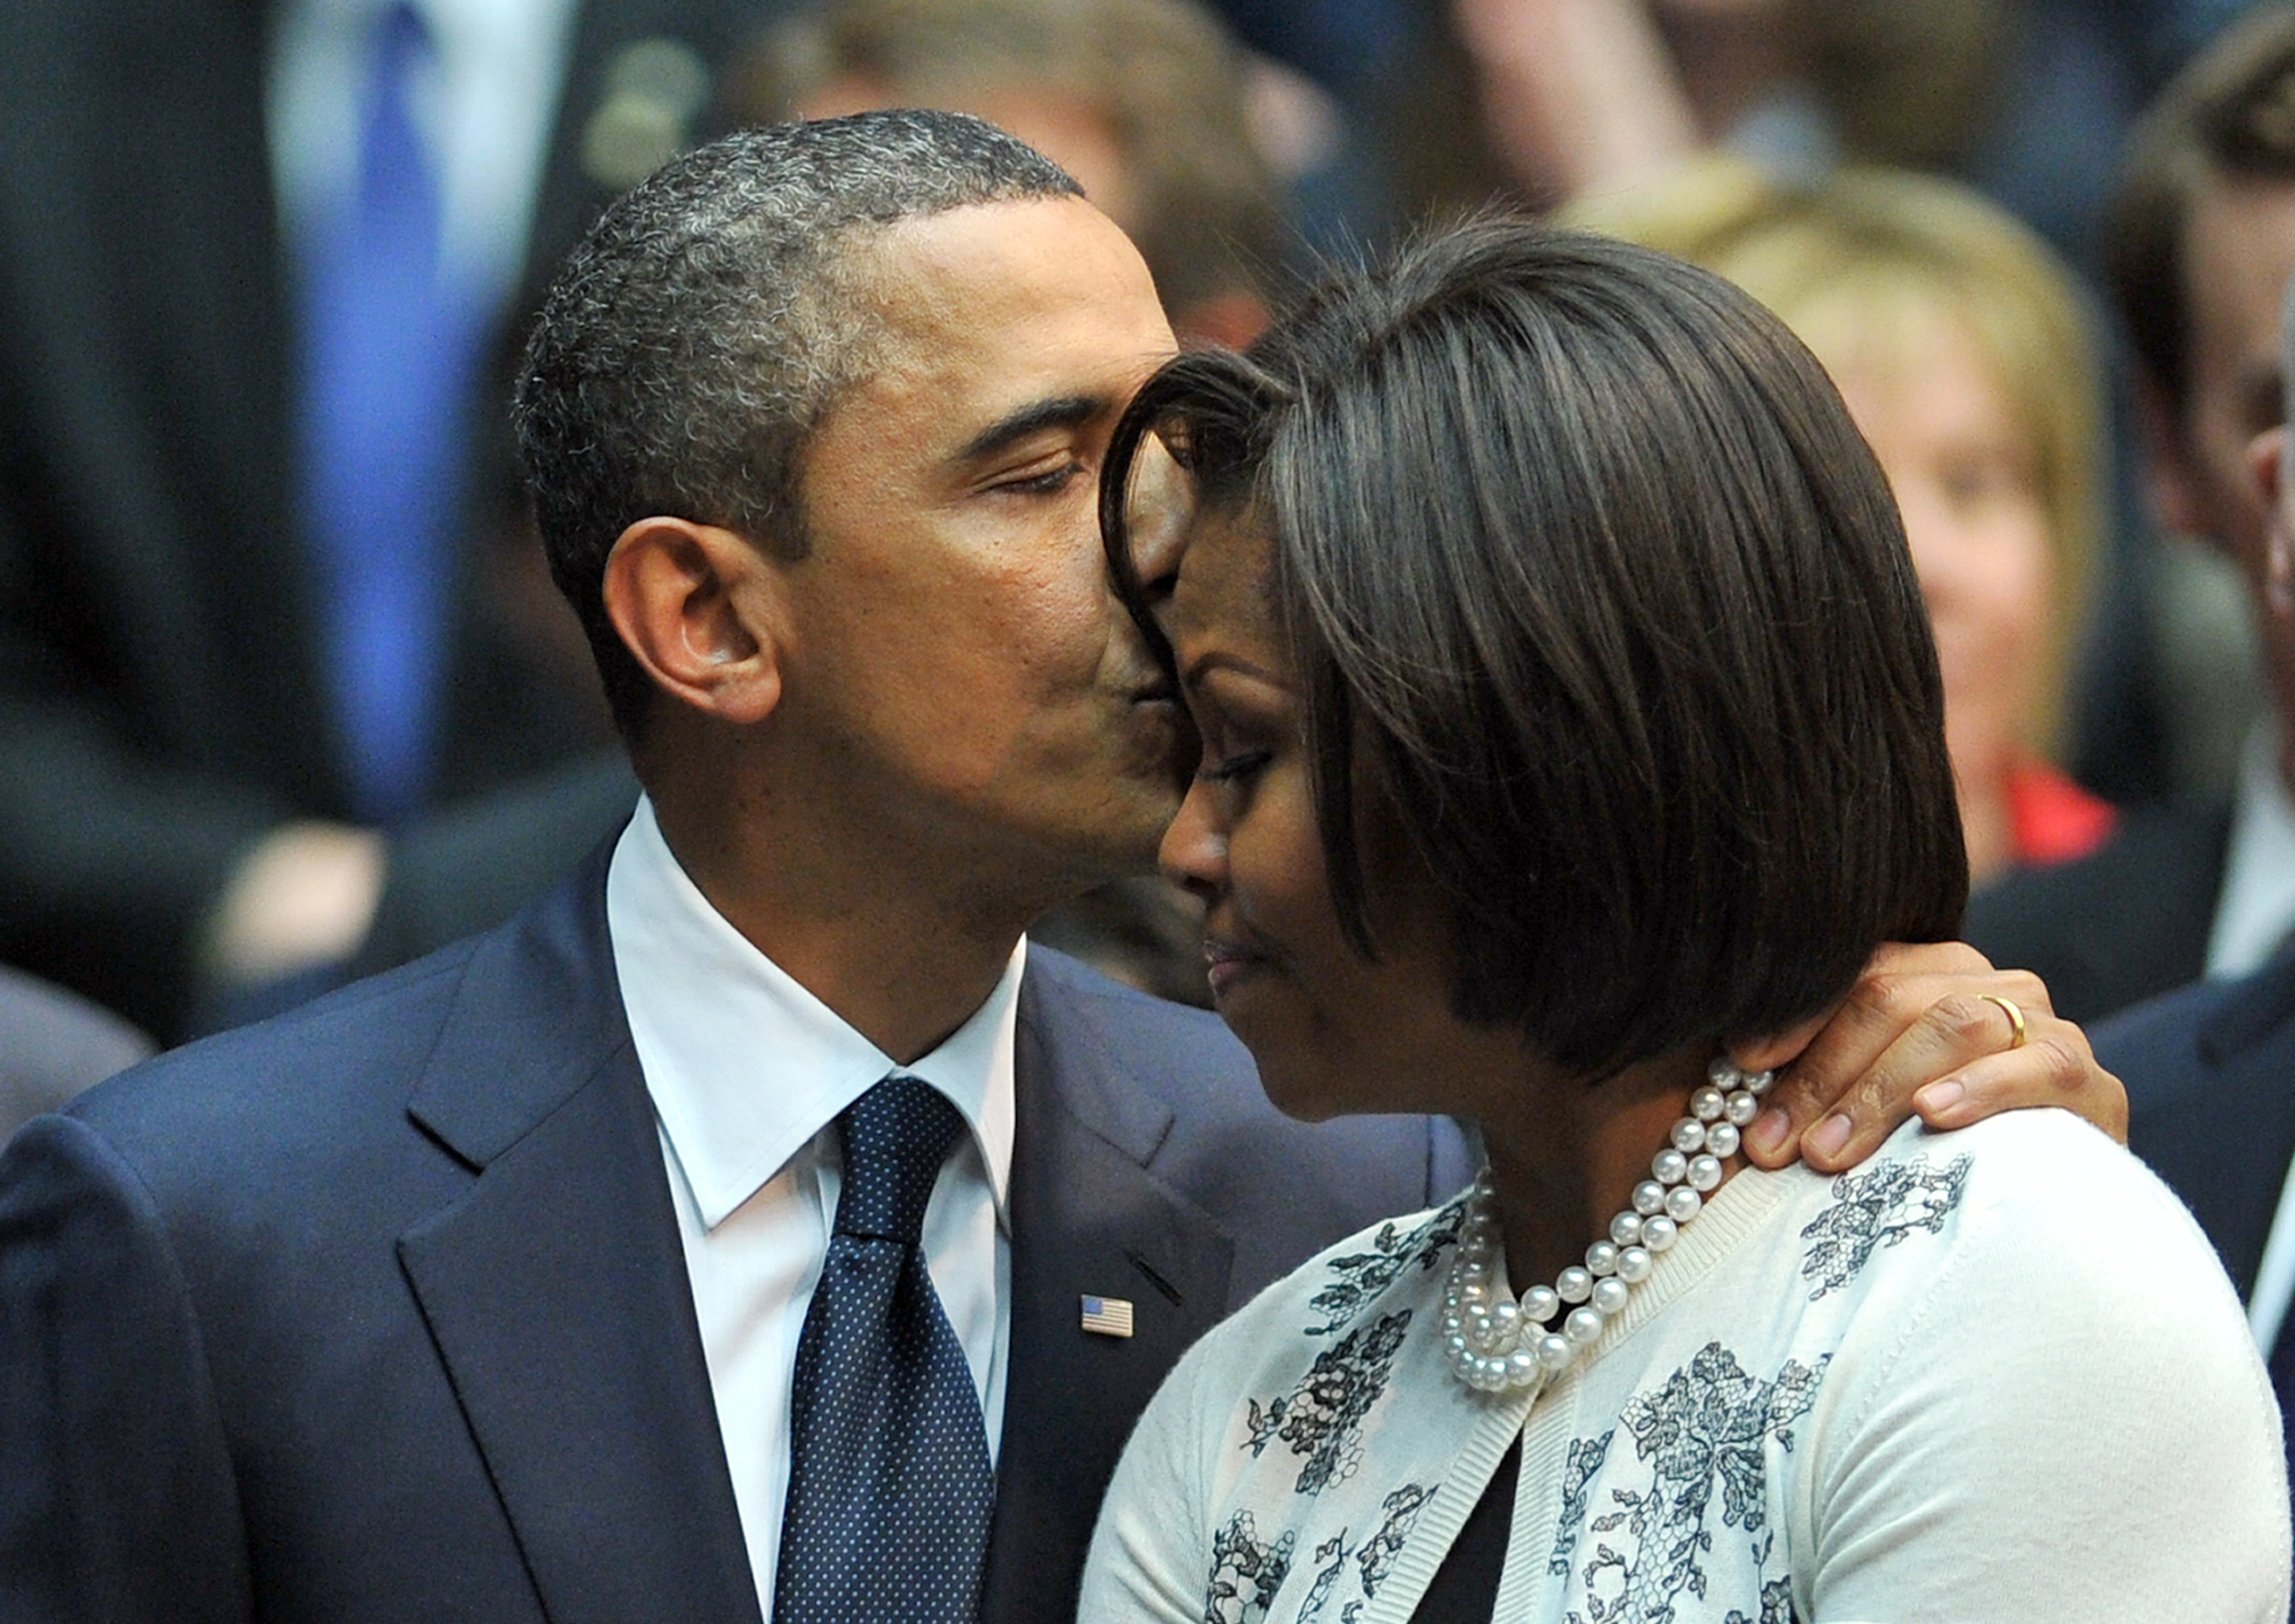 Barack Obama kisses Michelle Obama at the McKale Memorial Center on January 12, 2011 in Tucson, Arizona. | Source: Getty Images